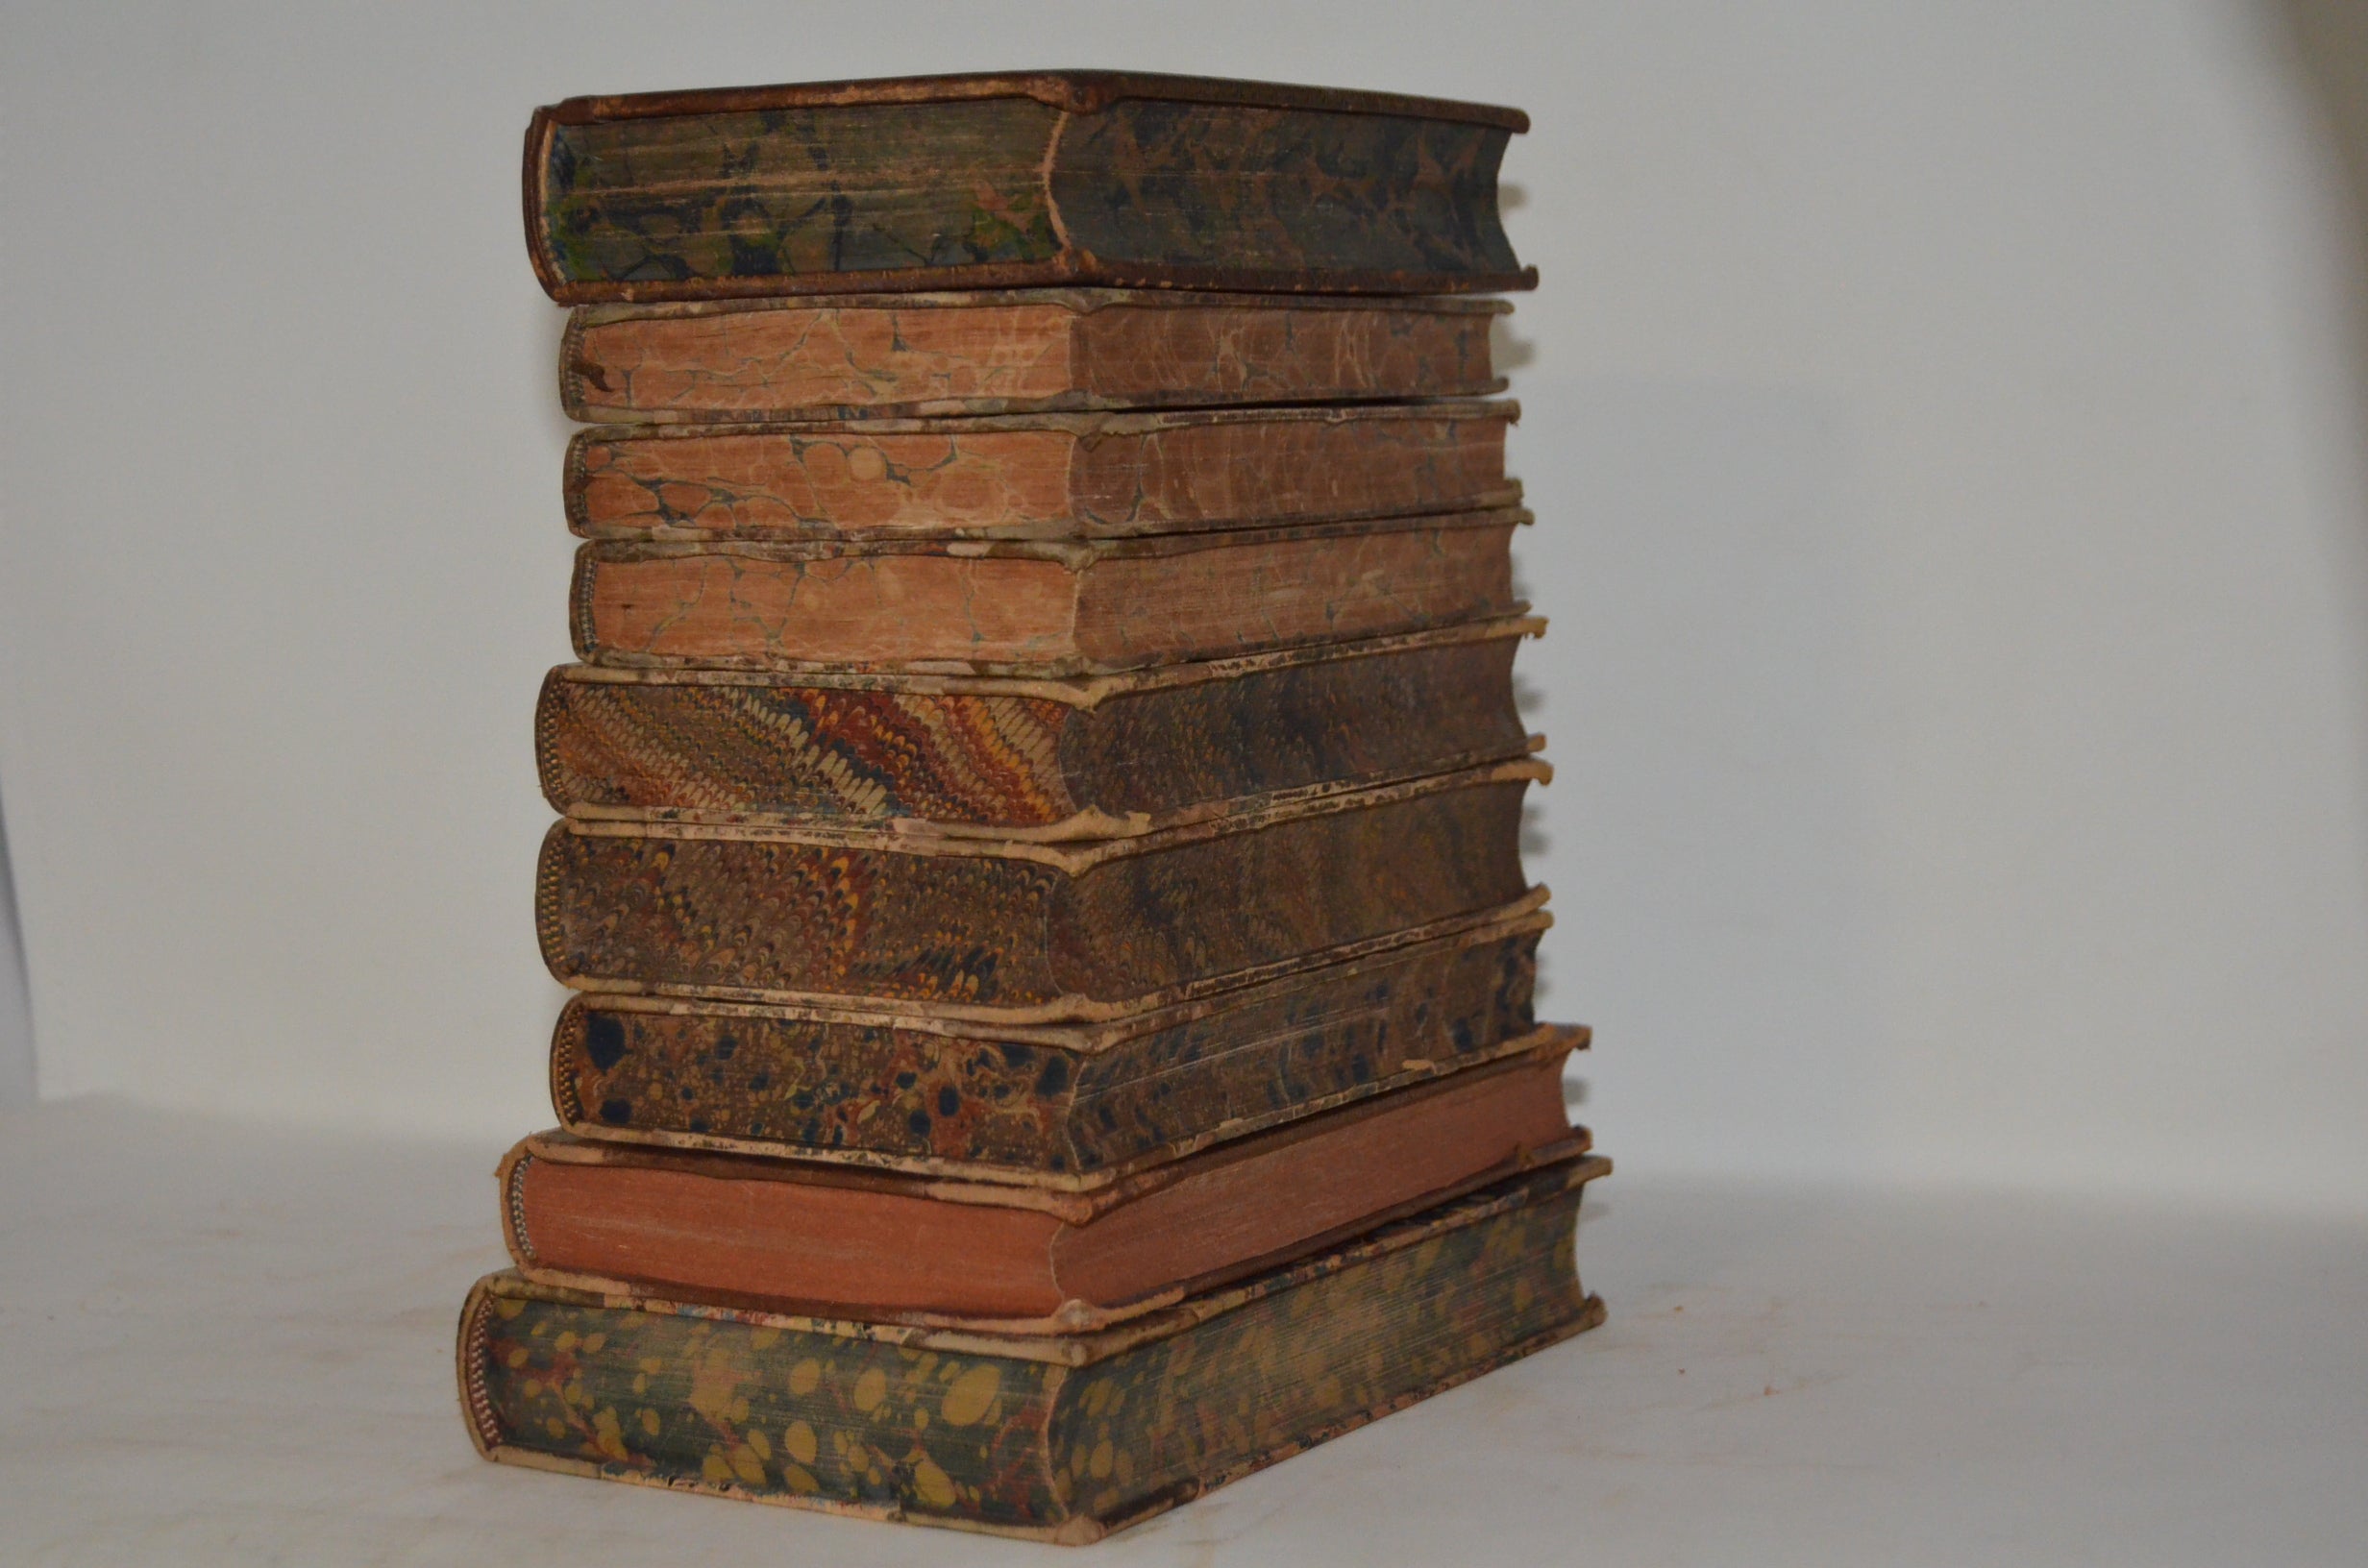 Antique Leather Bound Book Décor – 9” Shades of Brown, Maroon & Gold